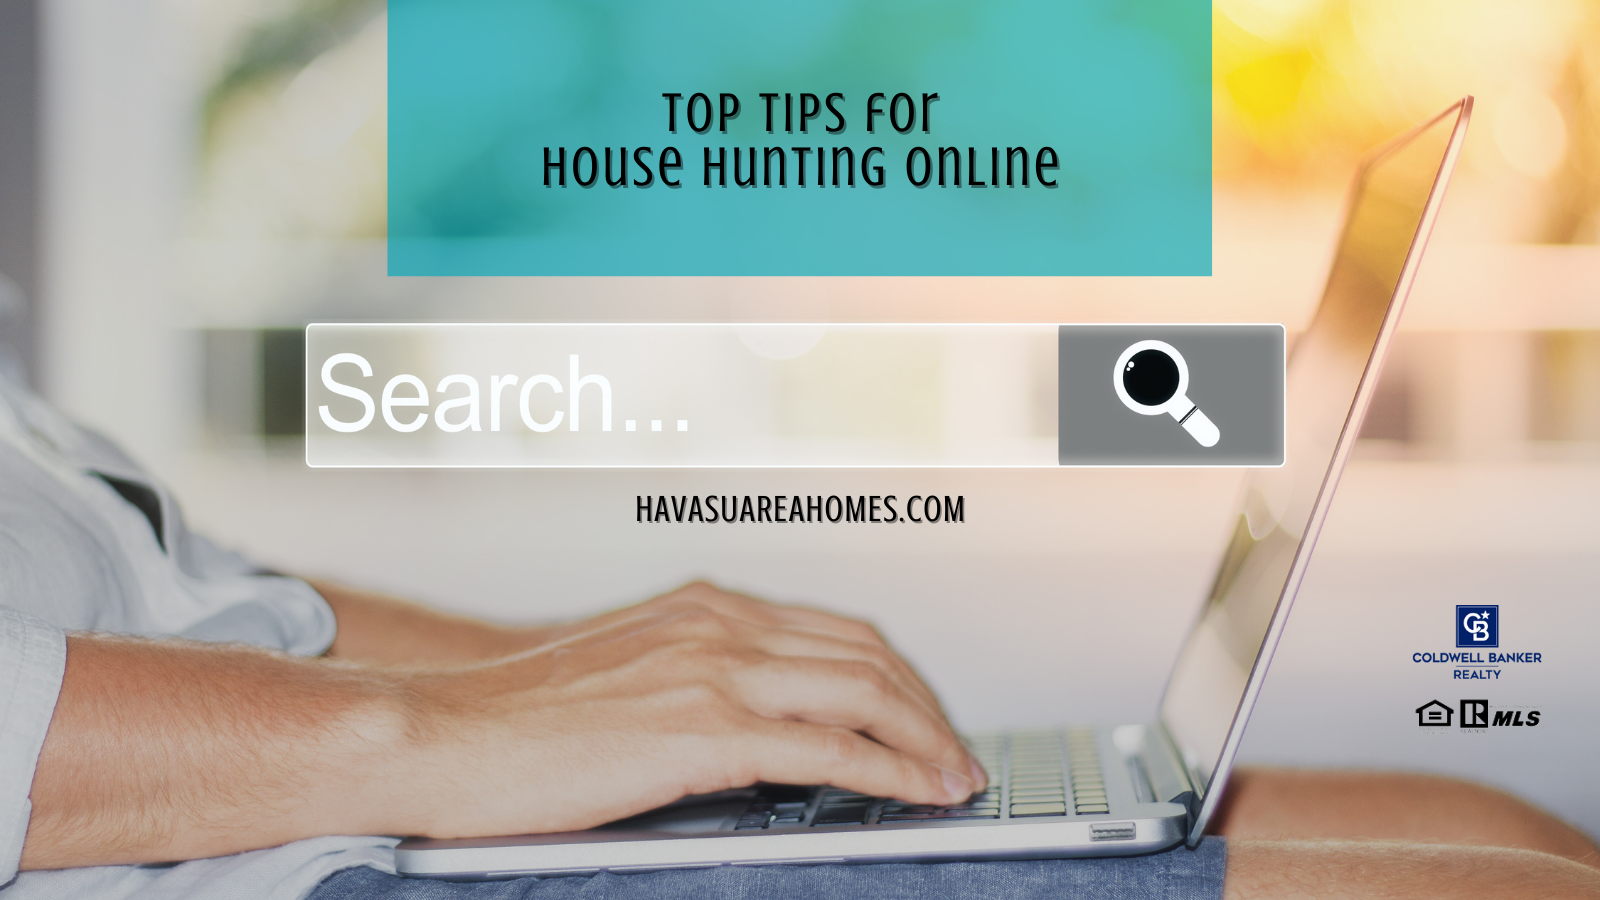 Top_Tips_for_House_Hunting_Online_lg.png